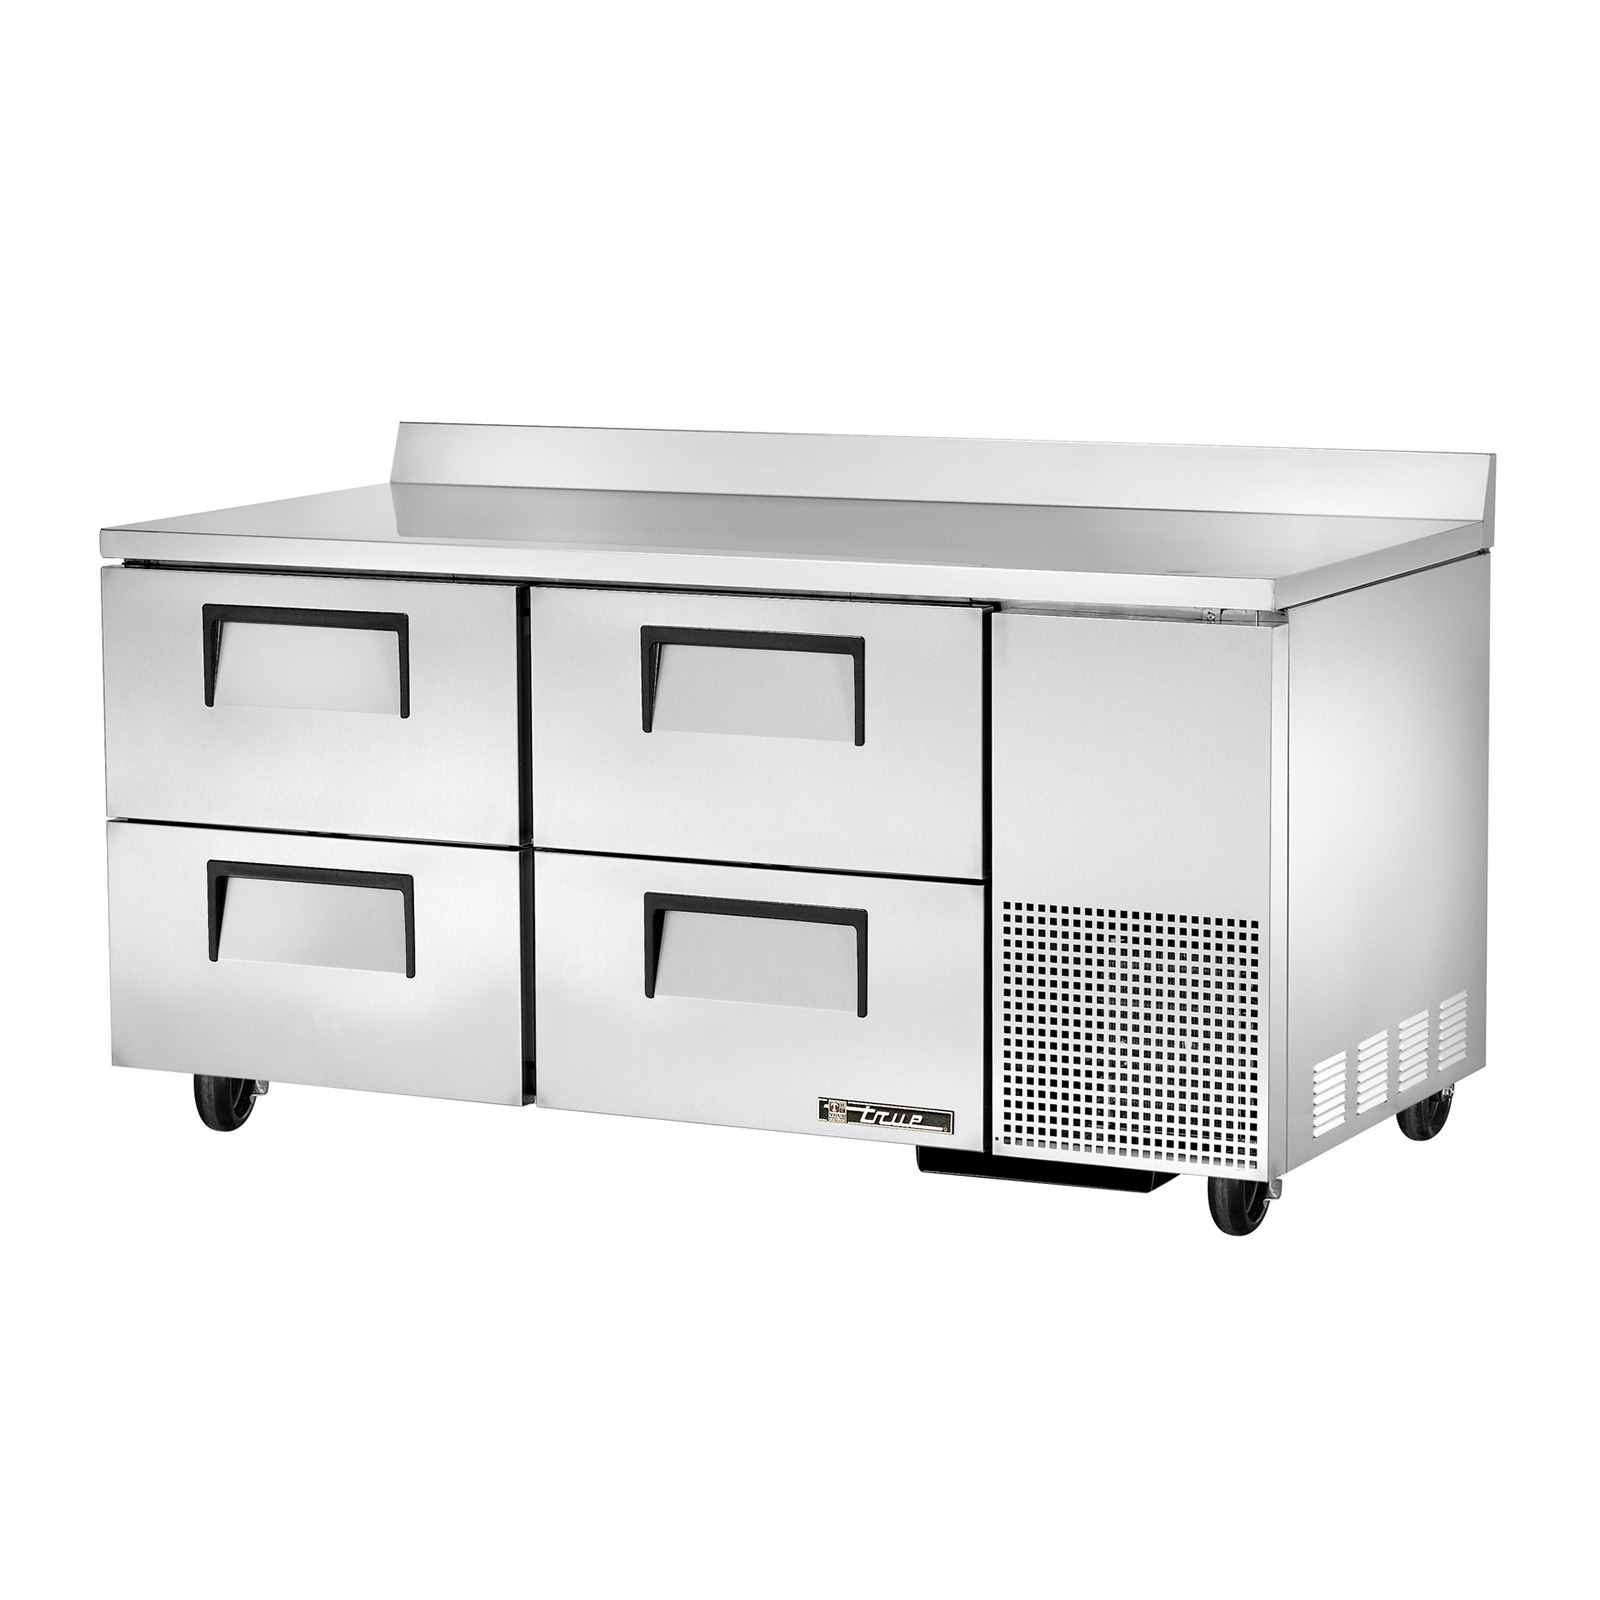 True Food Service Equipment TWT-67D-4 Refrigerated Counter, Work Top